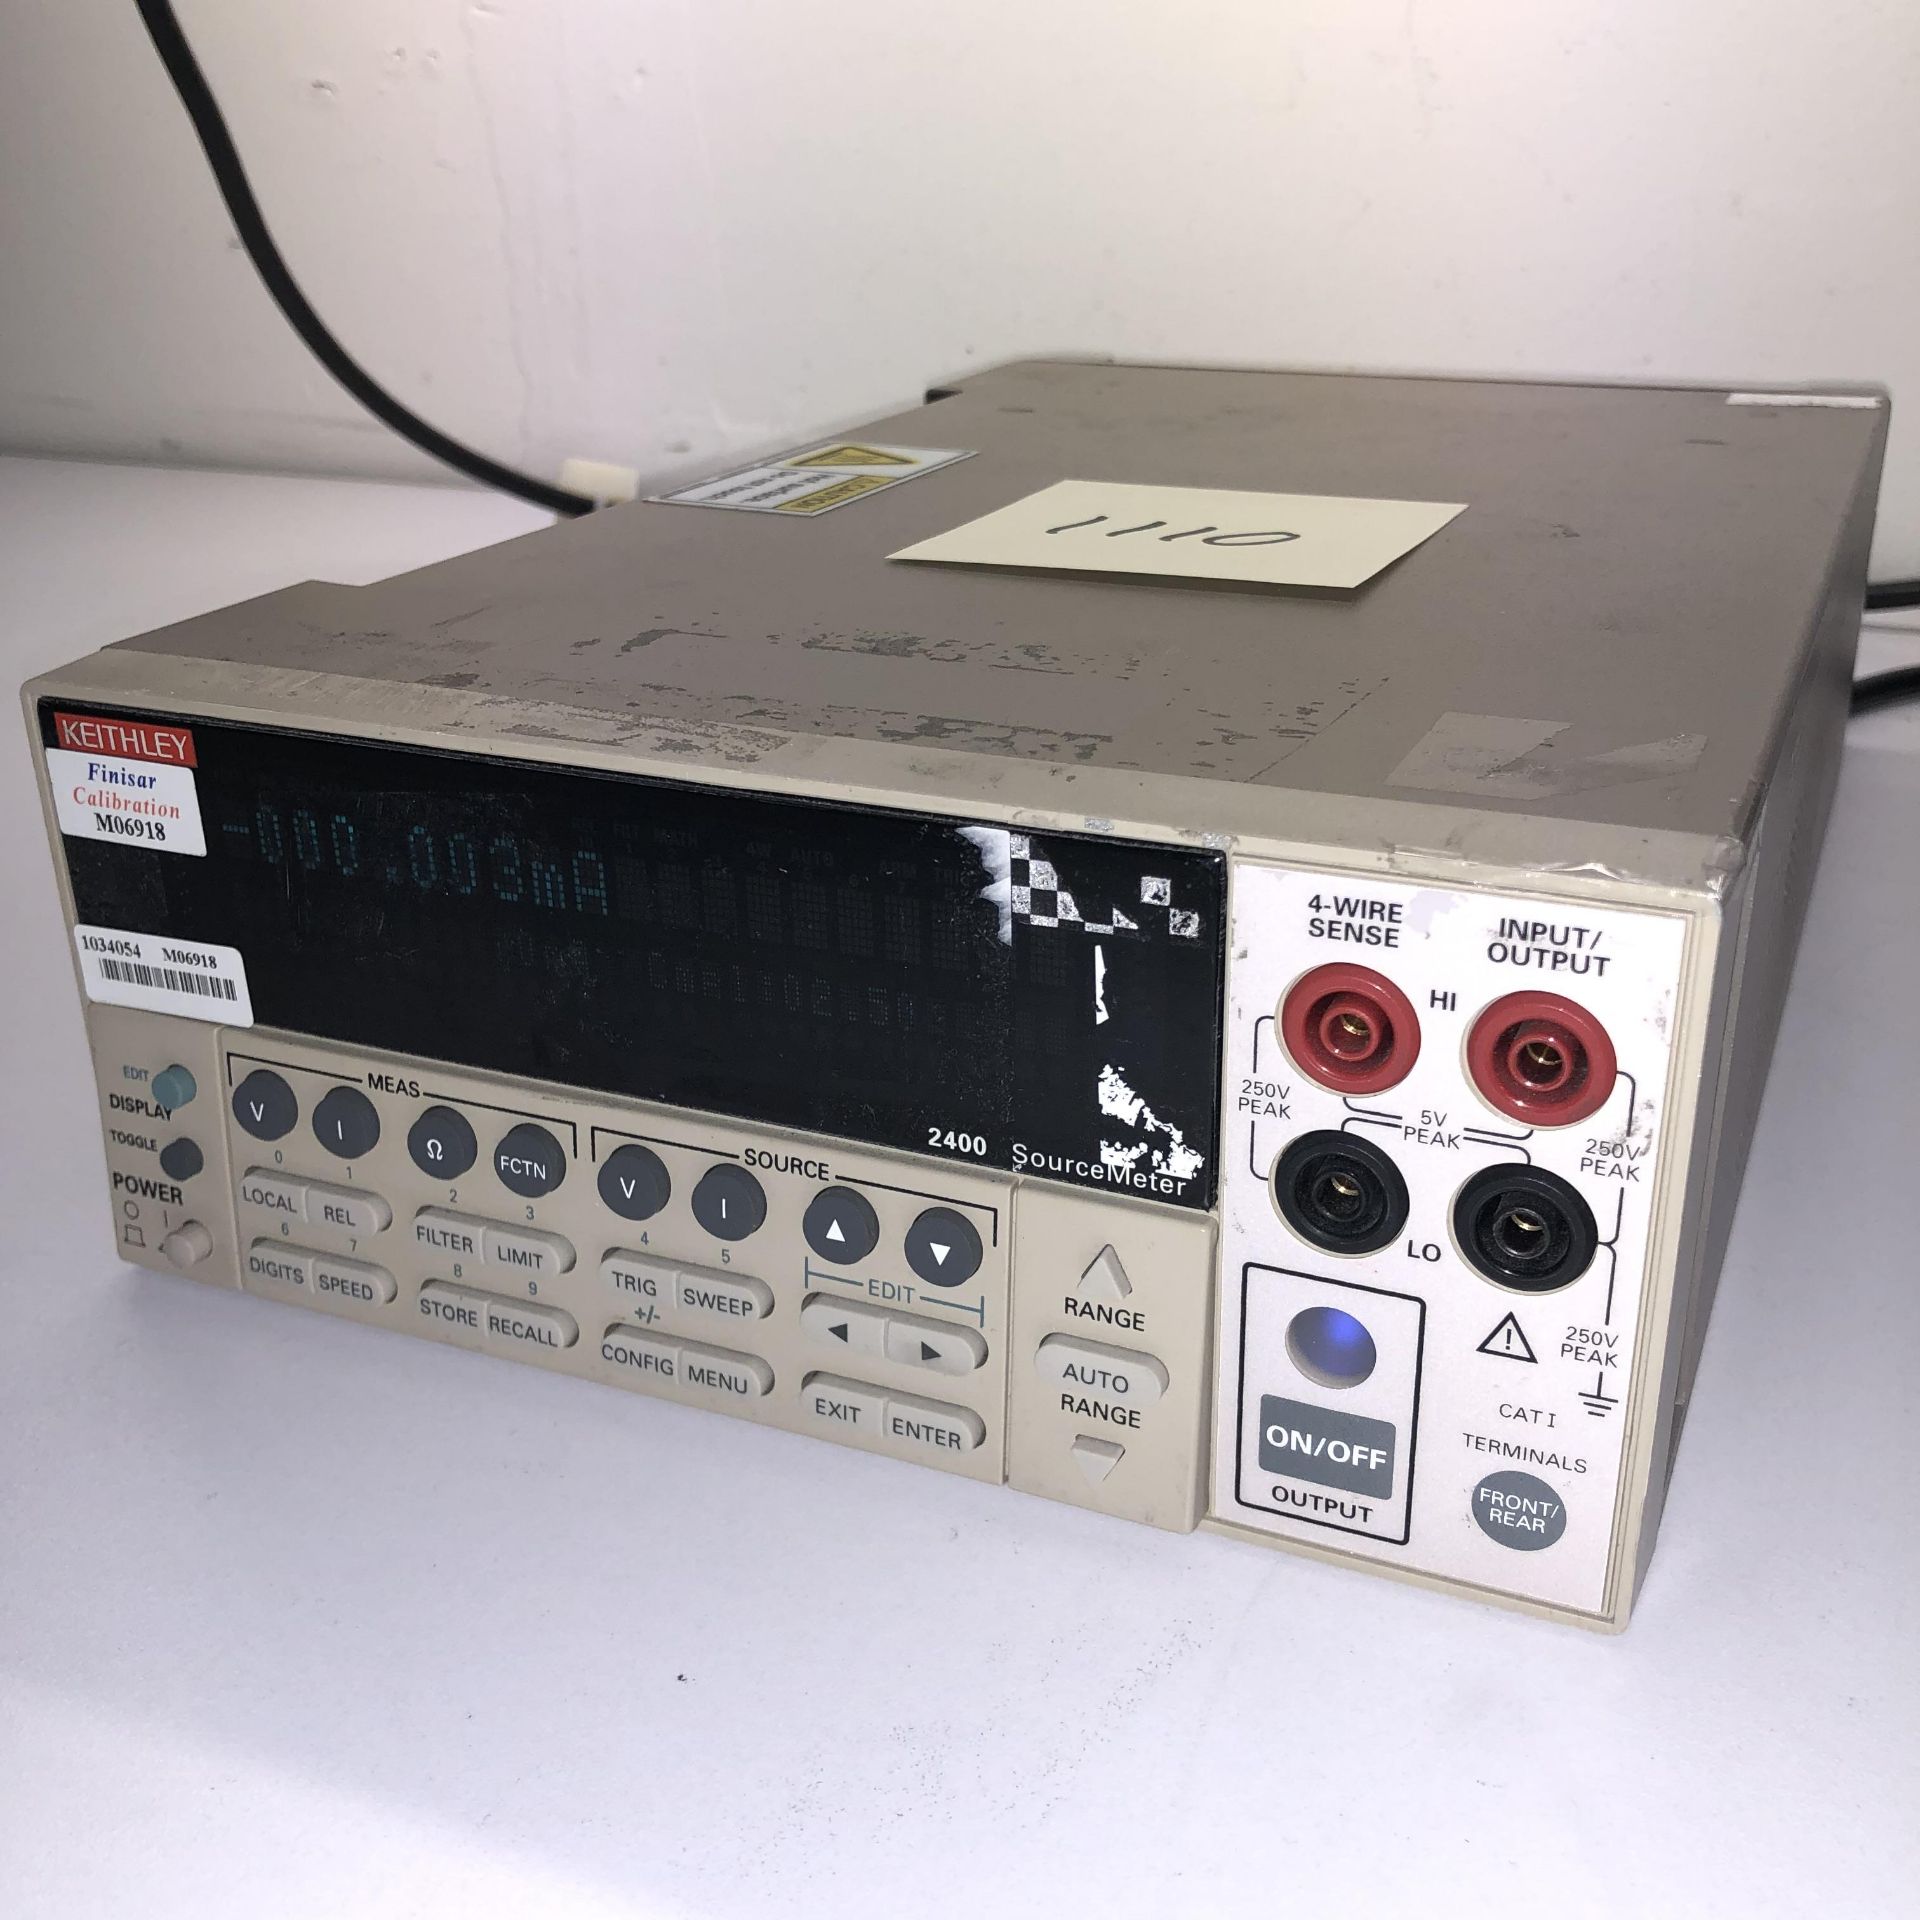 KEITHLEY 2400 SOURCE METER   Auto Off   1218 Alderwood Ave Sunnyvale, California - Image 3 of 5